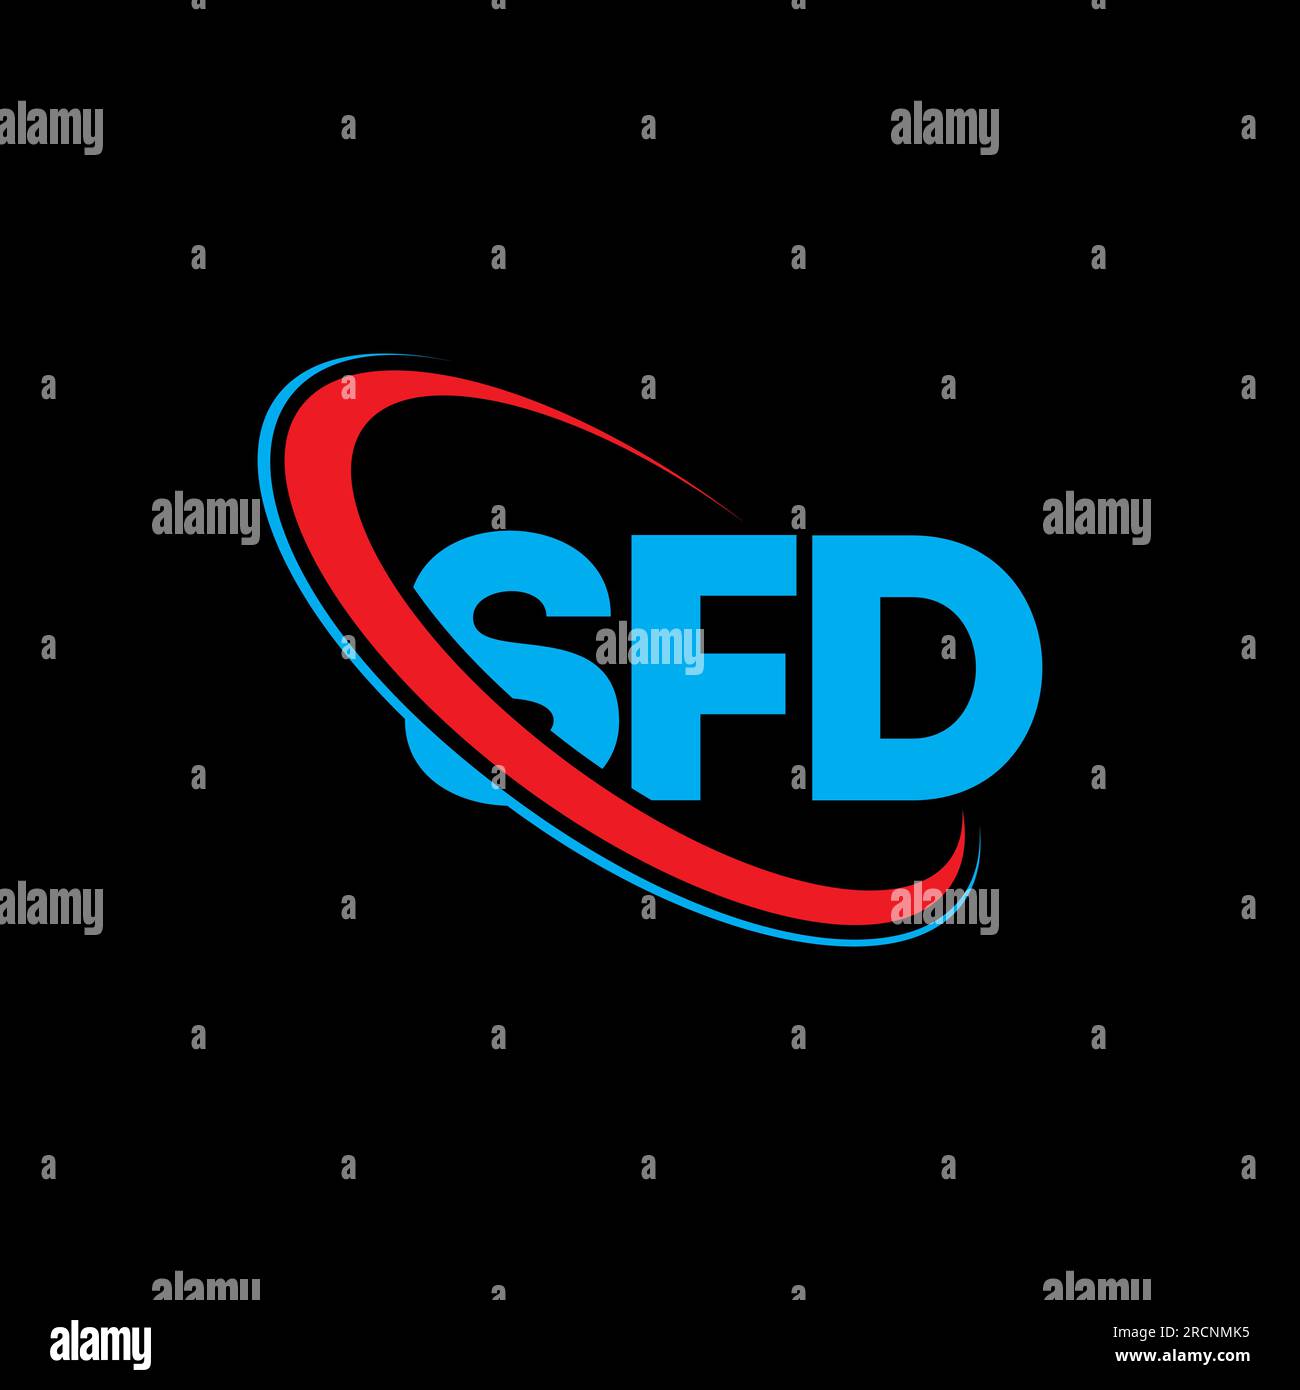 SFD logo. SFD letter. SFD letter logo design. Initials SFD logo linked with circle and uppercase monogram logo. SFD typography for technology, busines Stock Vector